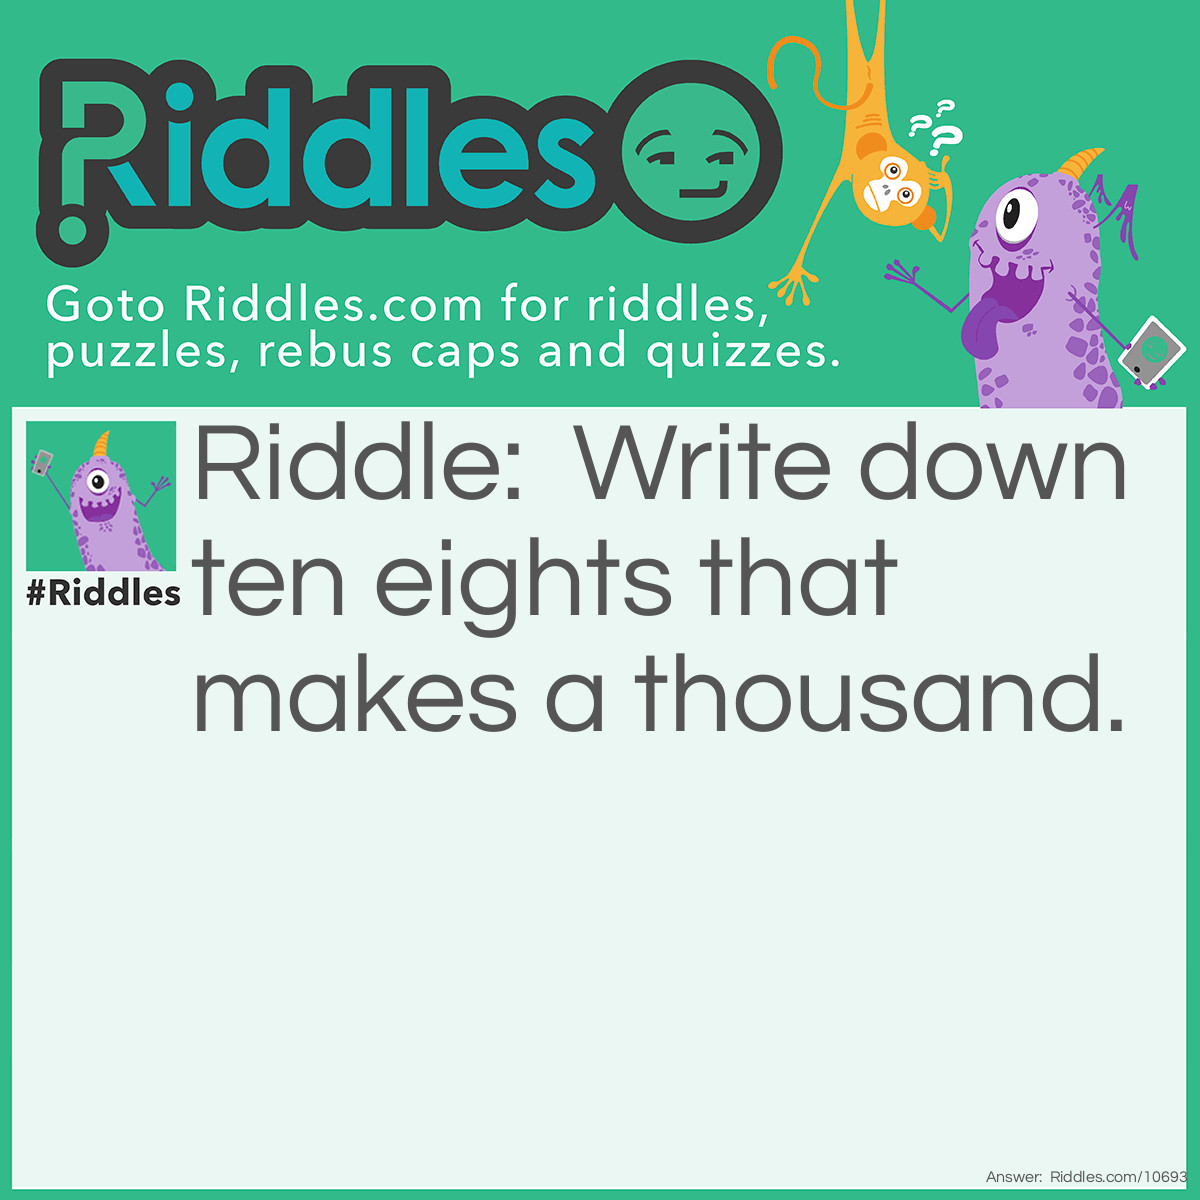 Riddle: Write down ten eights that makes a thousand. Answer: 888 + 88 + 8 + 8 + 8 + 8 - 8 = 1000